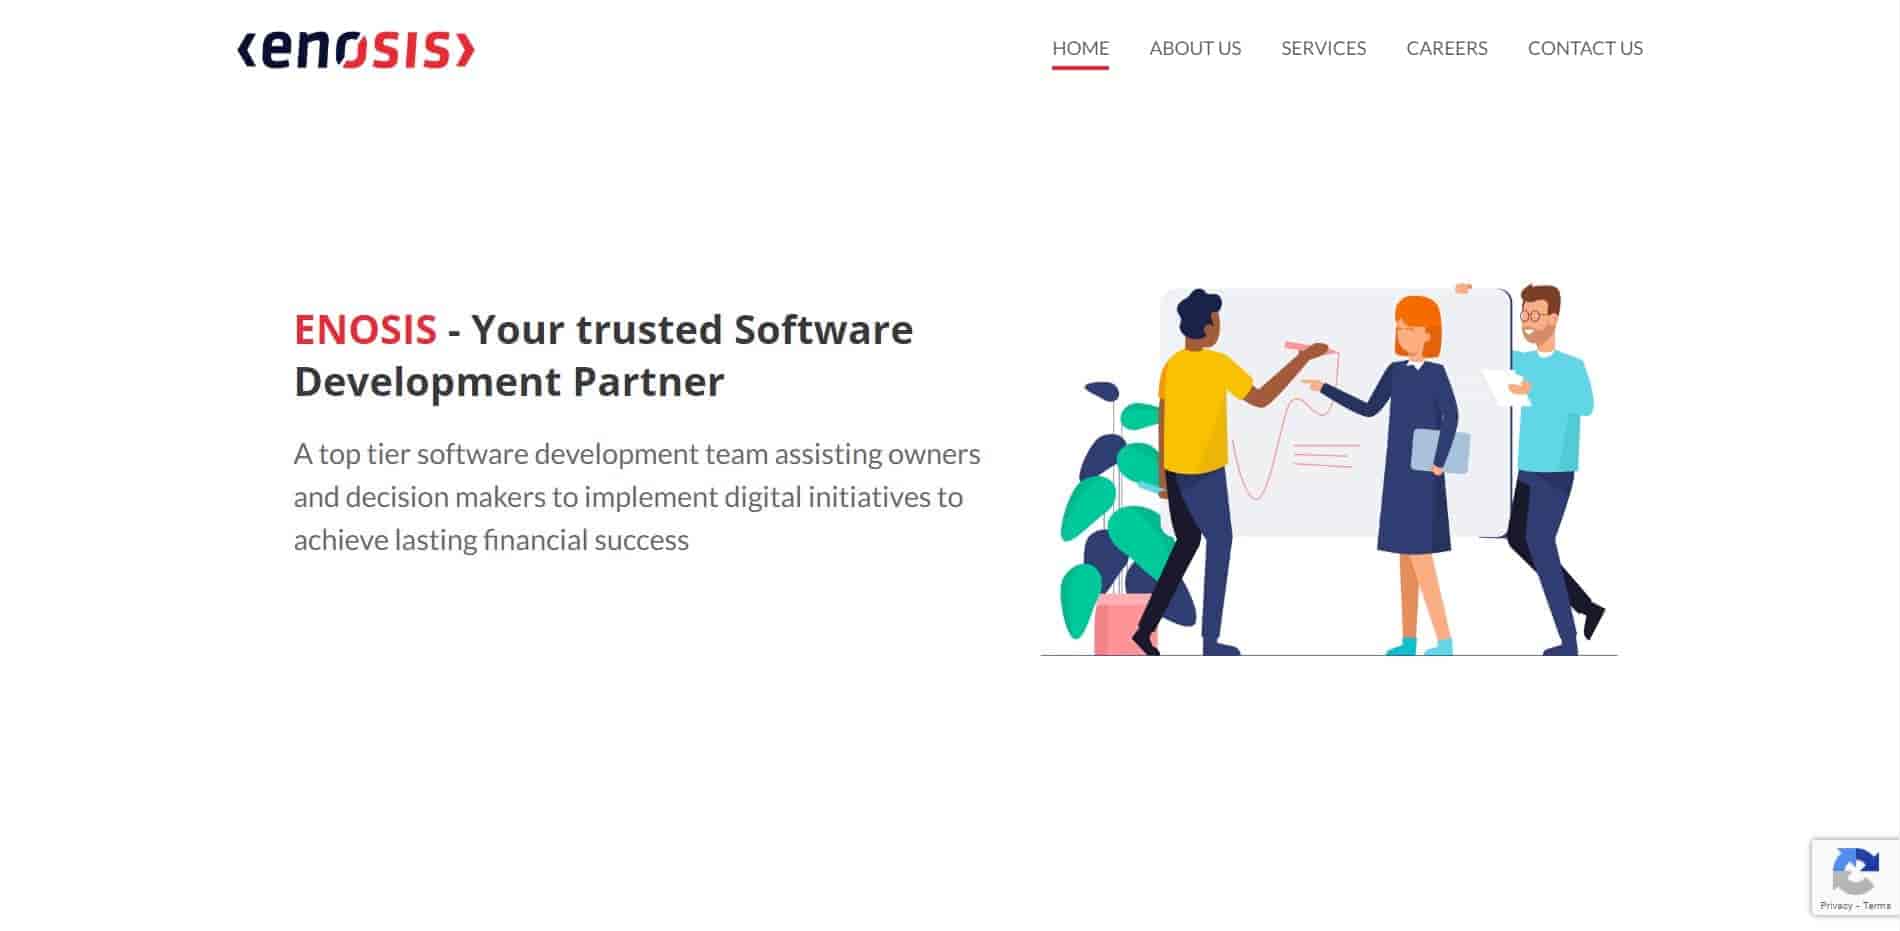 An still image of Enosis, one of the best software companies in Bangladesh mentioning 'Your trusted software development partner' and other details into their services.